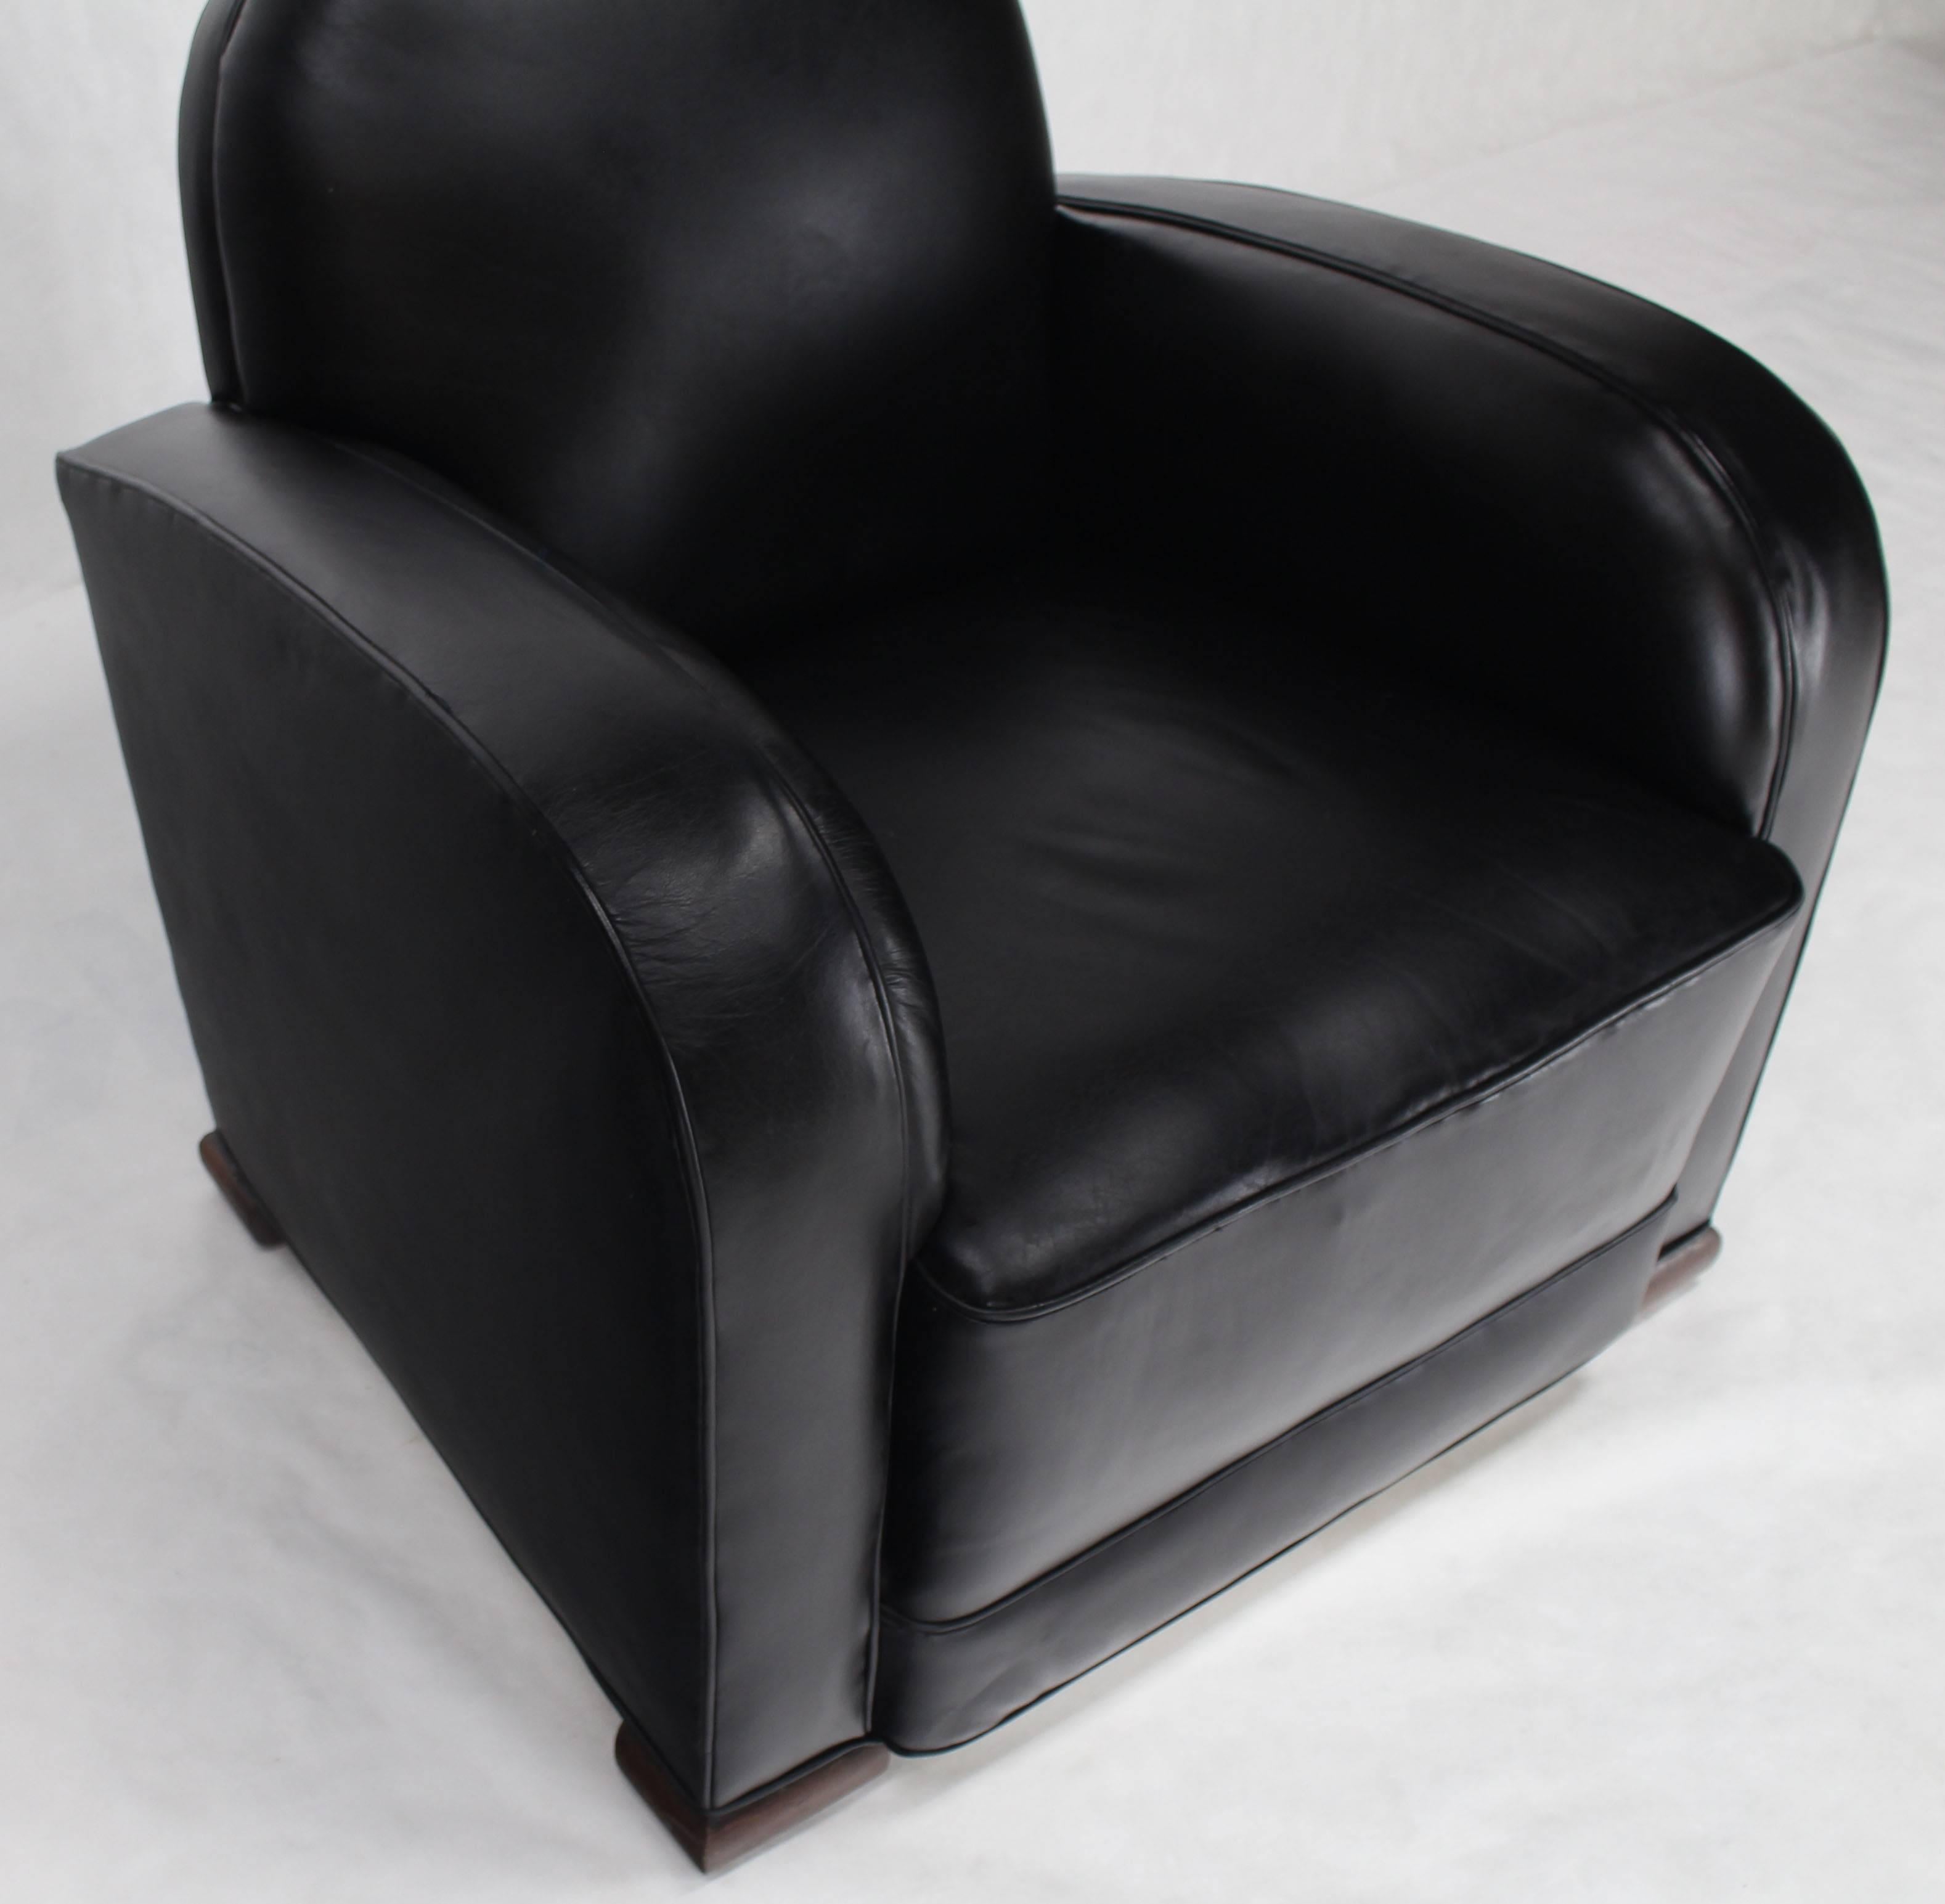 Pair of new black leather upholstery deco - mid century modern lounge chairs.